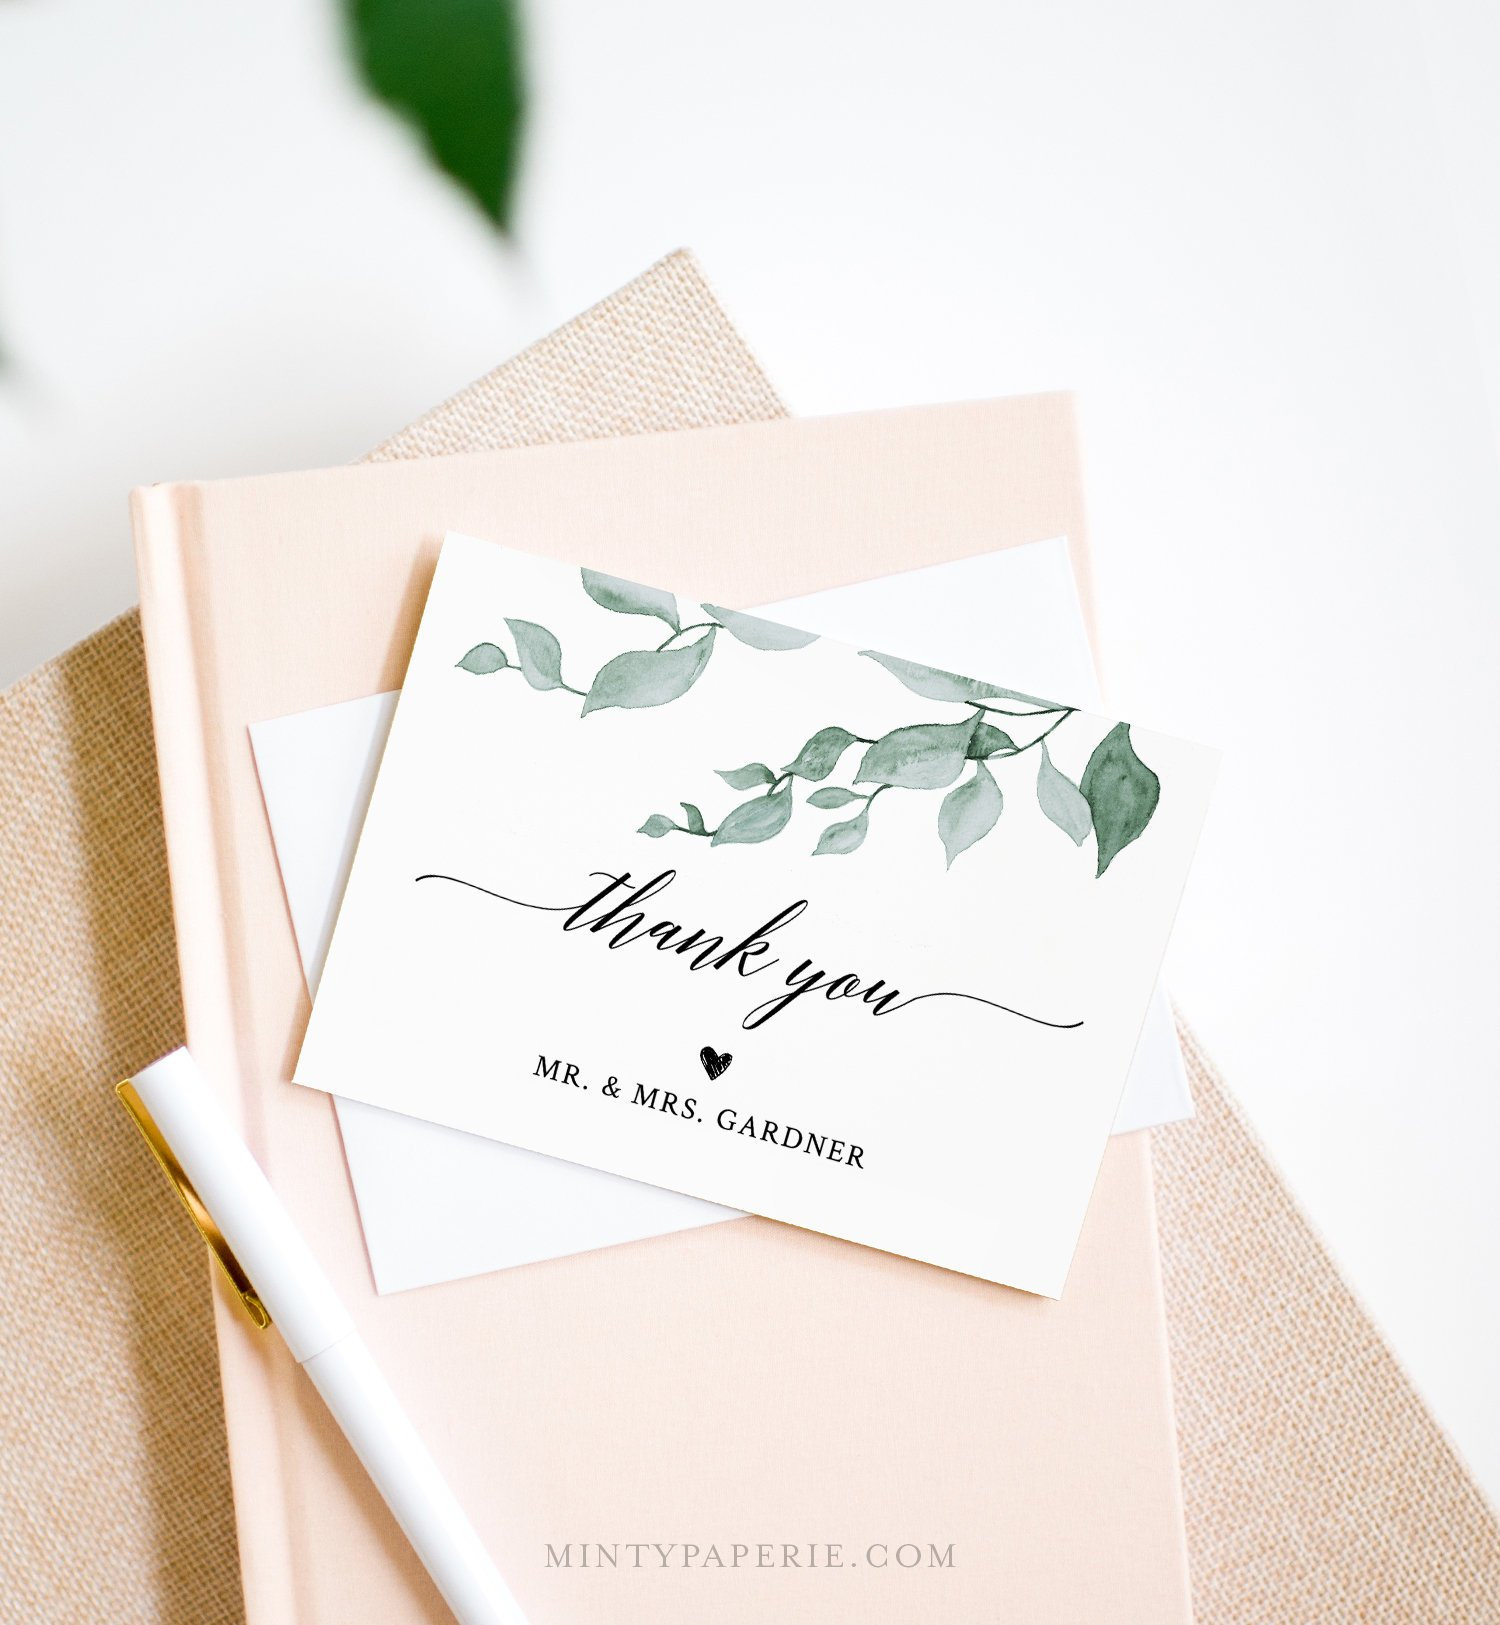 Greenery Thank You Note Card Template Folded Wedding Or Bridal Shower Thank You Card 100 Editable Text Instant Download Diy 019 117tyc